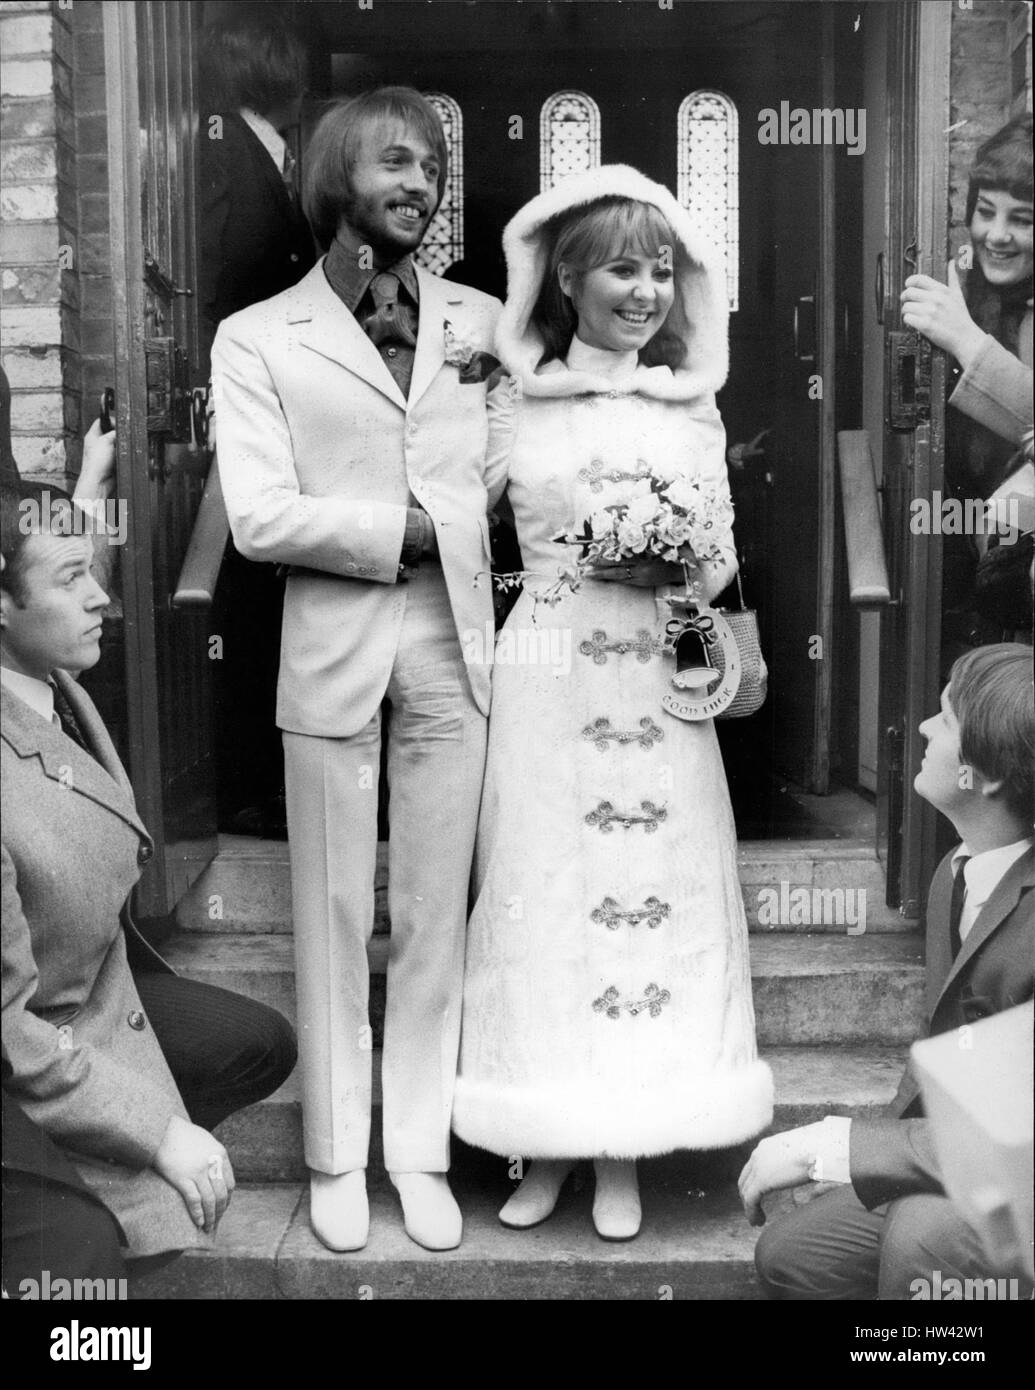 Feb. 02, 1969 - Lulu Weds: Pop Singer Lulu was married today to Maurice Gibb, of the Bee Gees pop group- at St. James's Church, Gerrard's Cross, Buckingham shire. Lulu wore a floor length coat and dress in white moire complete with attached hood. Hood and coat were trimmed with white mink- around the hood and down the front of the coat. Maurice was wearing a white suit with a royal blue moire shirt. Picture Shows: The bride and groom after the ceremony. (Credit Image: © Keystone Press Agency/Keystone USA via ZUMAPRESS.com) Stock Photo